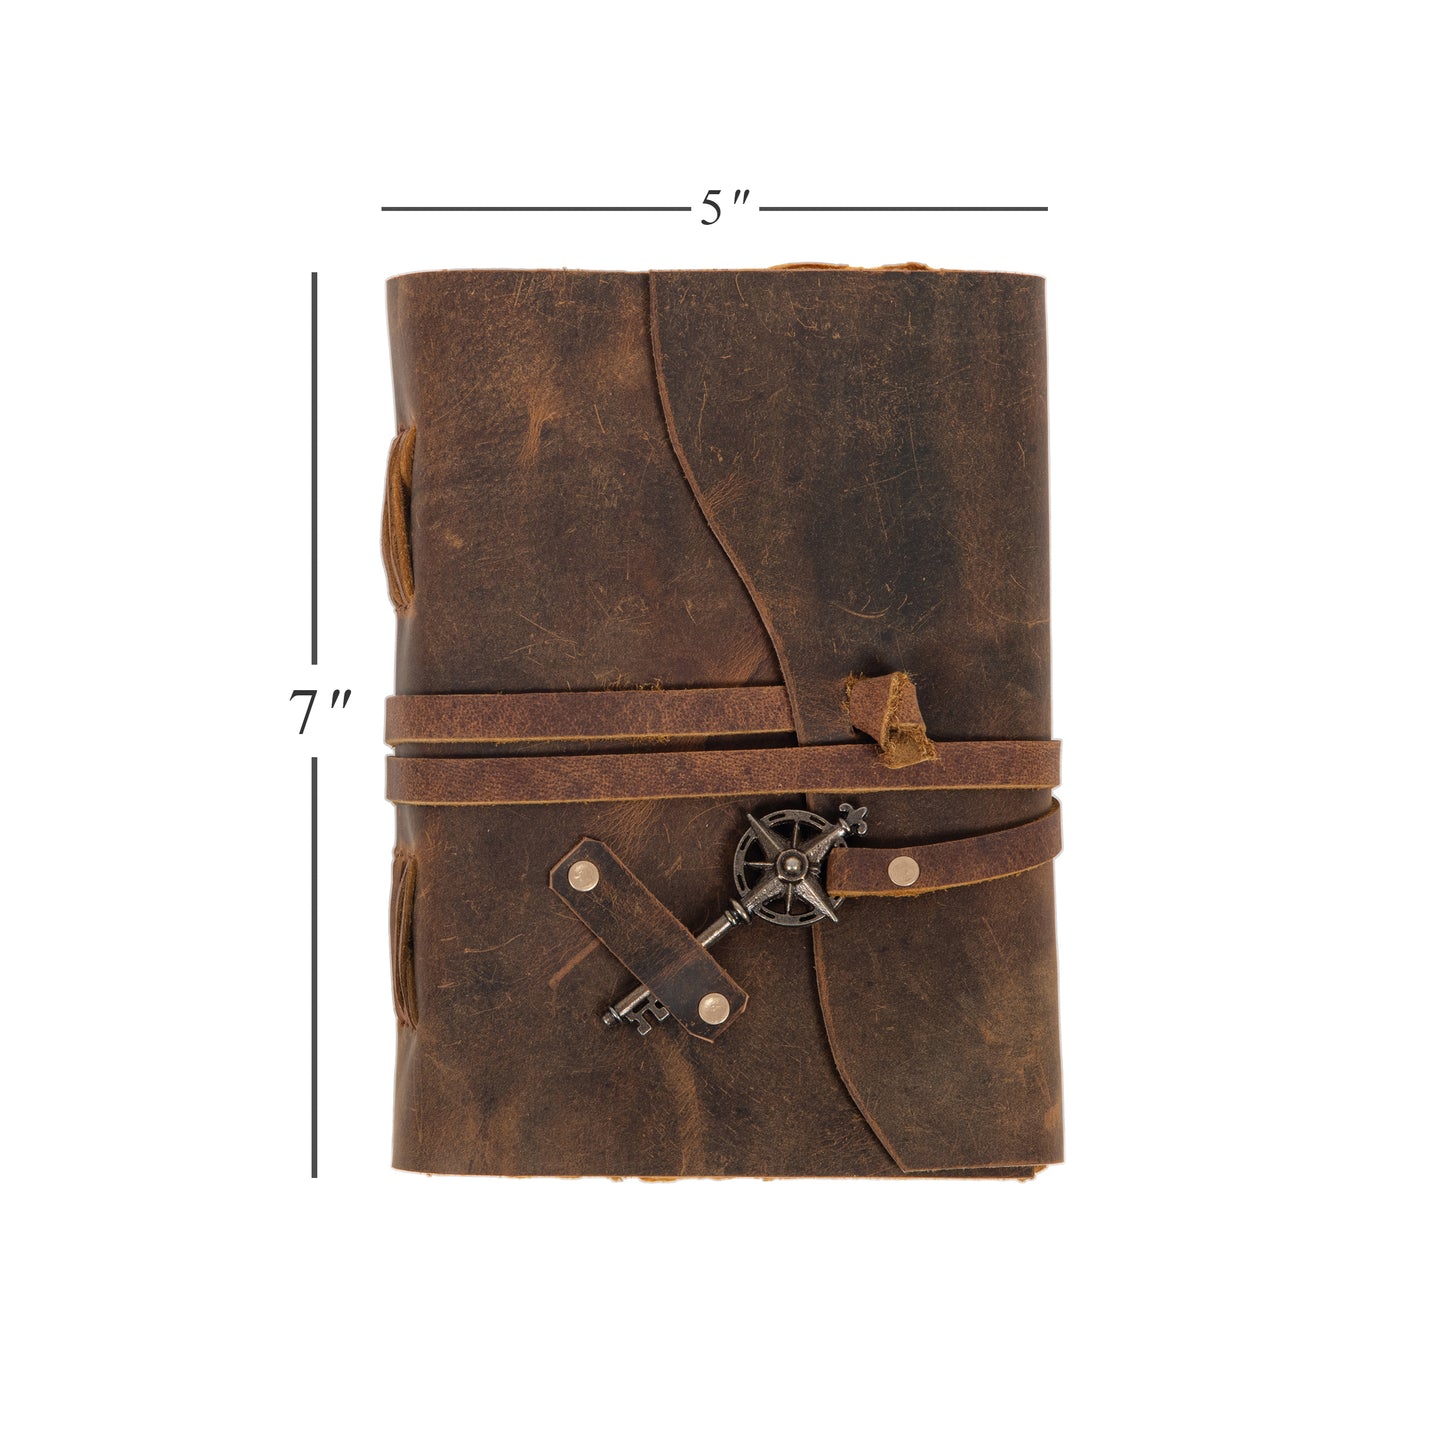 Vintage Leather Bound Diary with Key